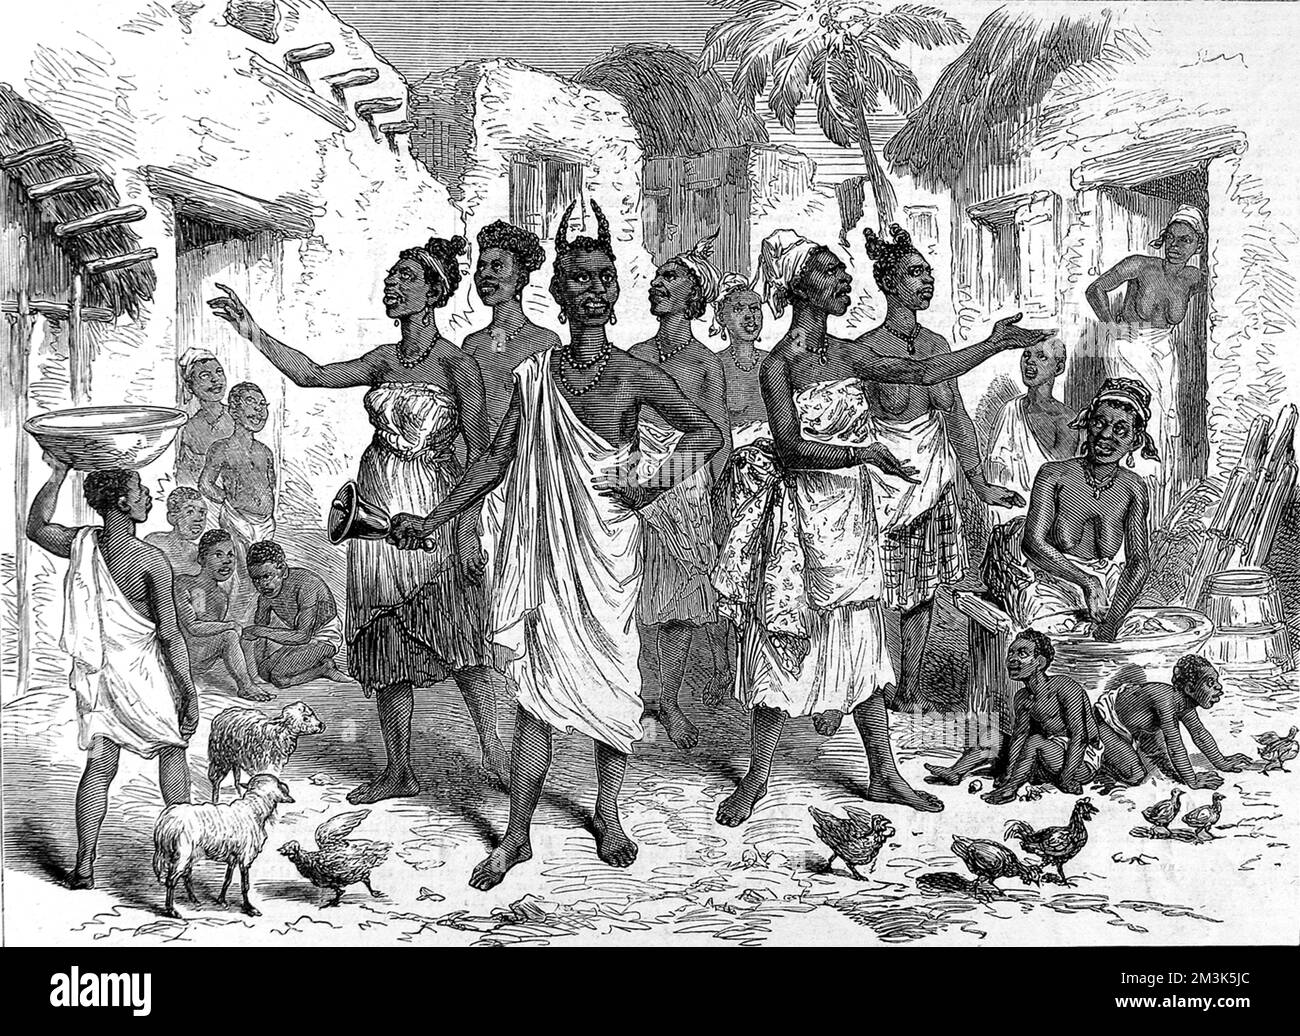 Natives from 'protected' tribes are summoned with a bell and shouts to act as bearers or carriers for the British in the 2nd Ashanti War (1873-74). In 1873, after decades of an uneasy relationship between the British and the Acing people of central Ghana, the British attacked and virtually destroyed the Asanti capital of Kumasi, and officially declared Ghana a crown colony on 24 July 1874.  After this they moved their administrative capital from Cape Coast Castle to Accra.  1874 Stock Photo